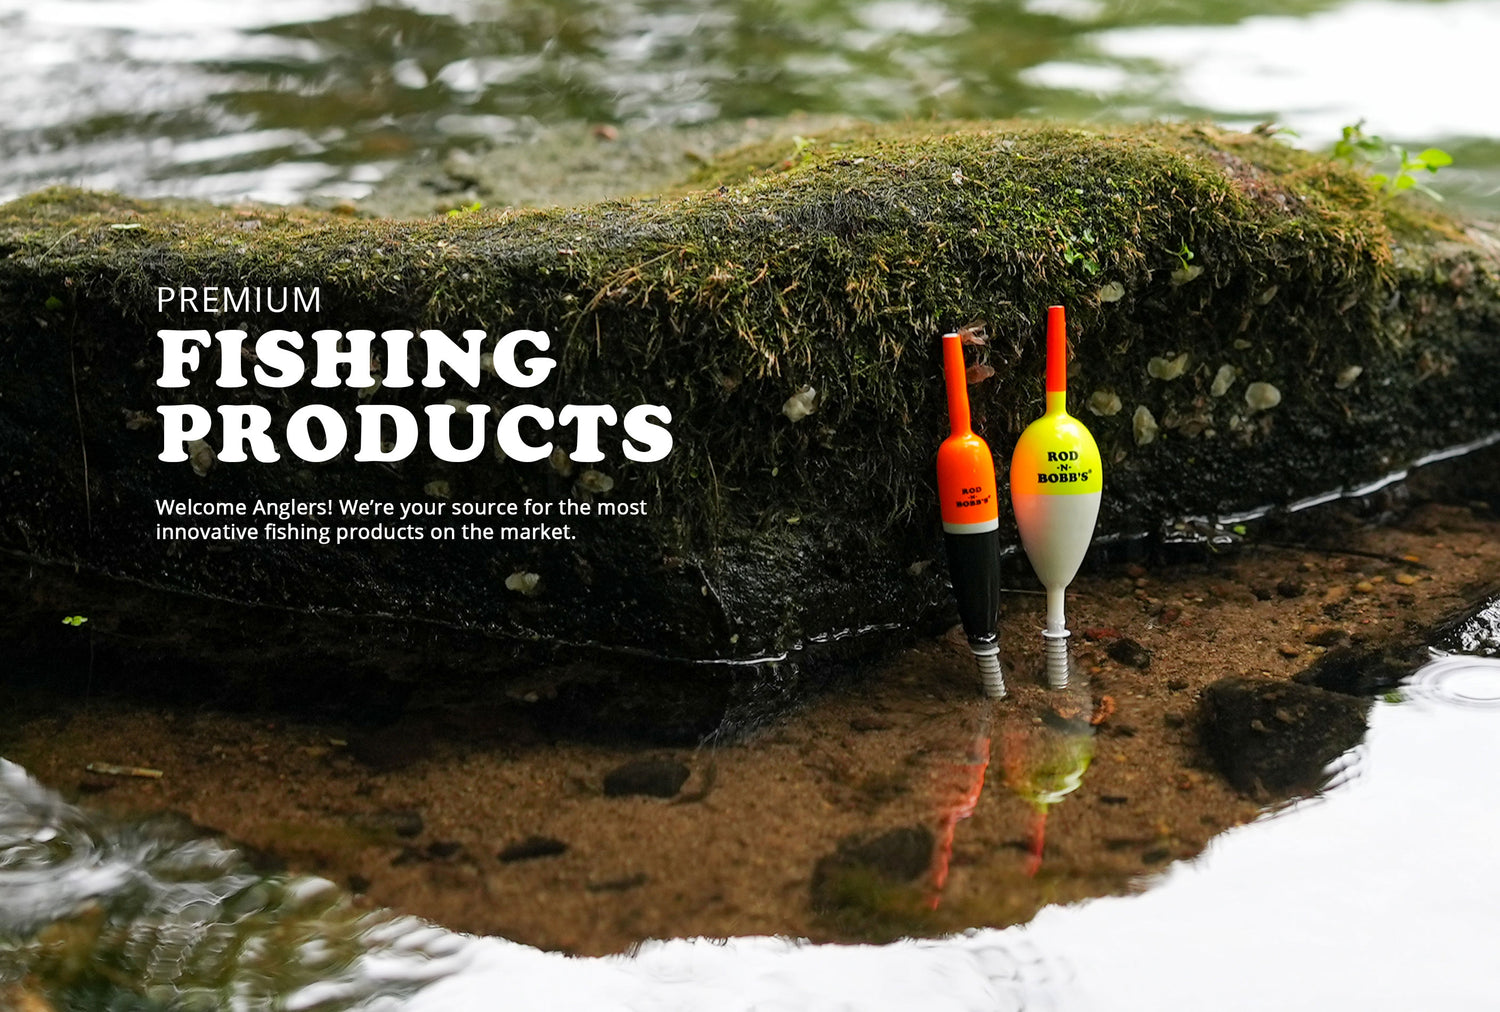 Premium Fishing Products, Bobbers, Hooks & Tackle